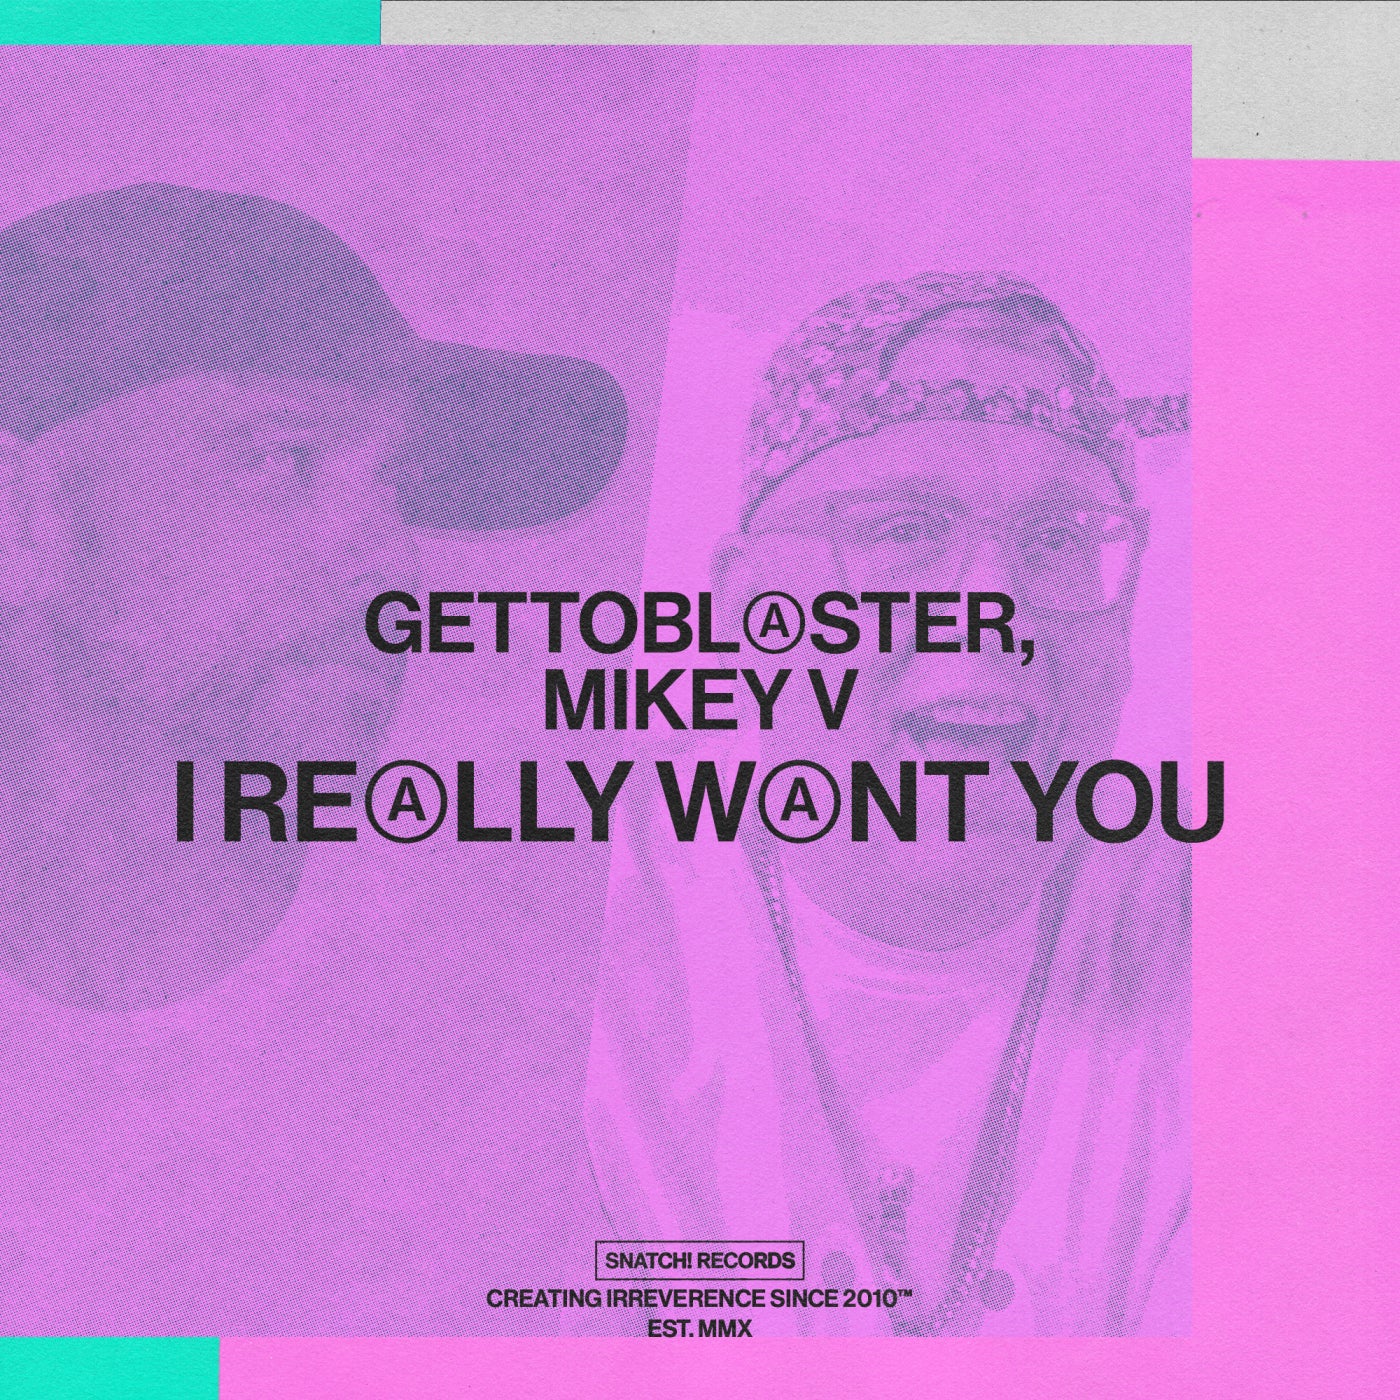 image cover: Mikey V, Gettoblaster - I Really Want You on Snatch! Records